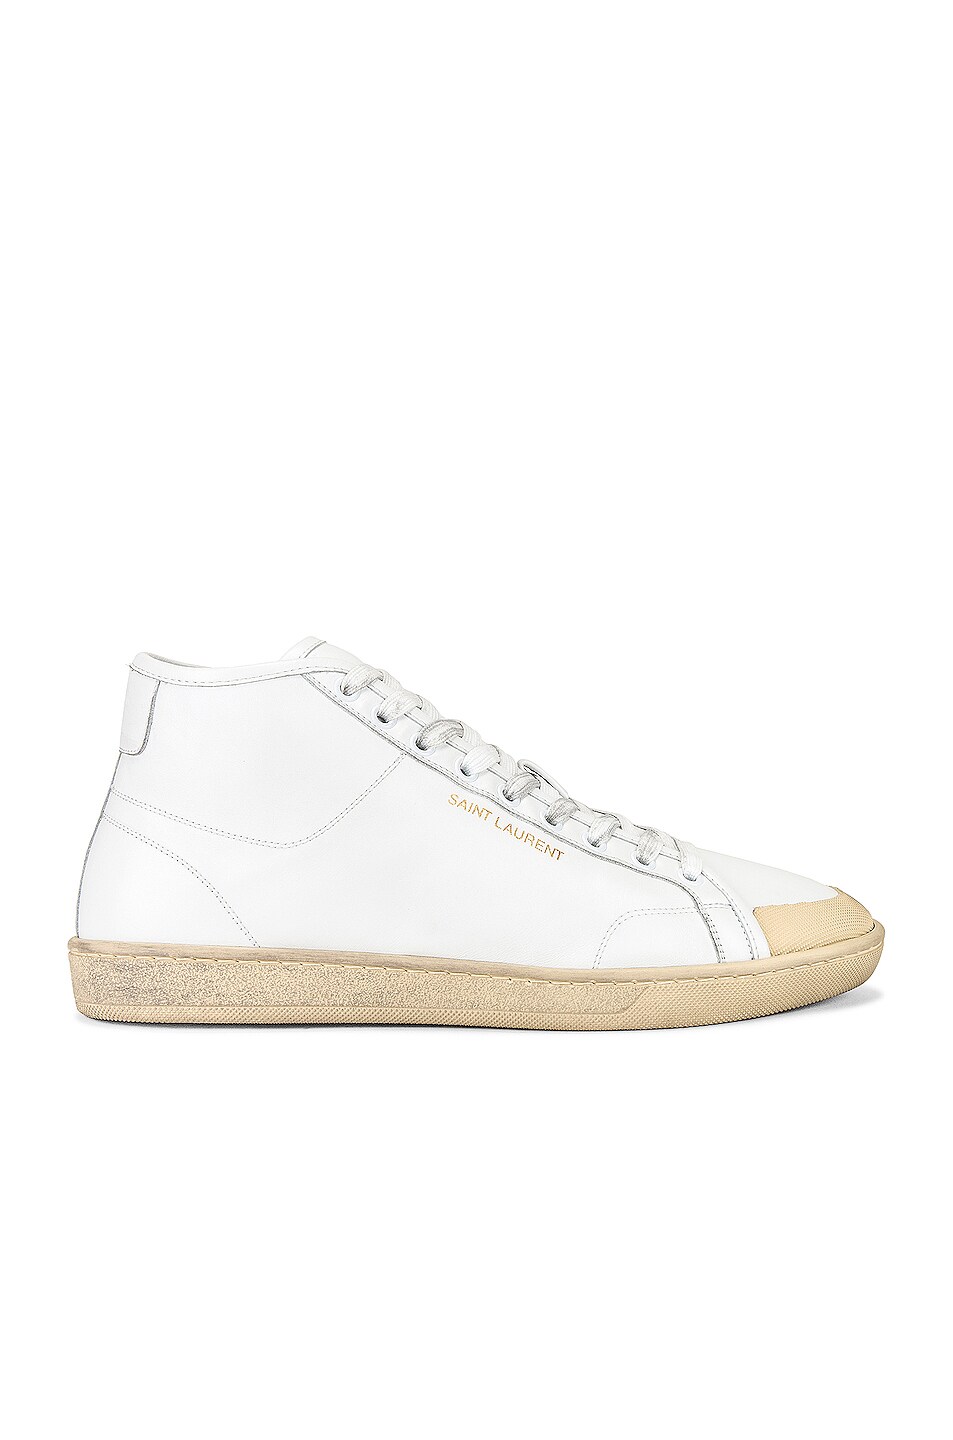 Image 1 of Saint Laurent Mid Top Sneaker in White & Butter